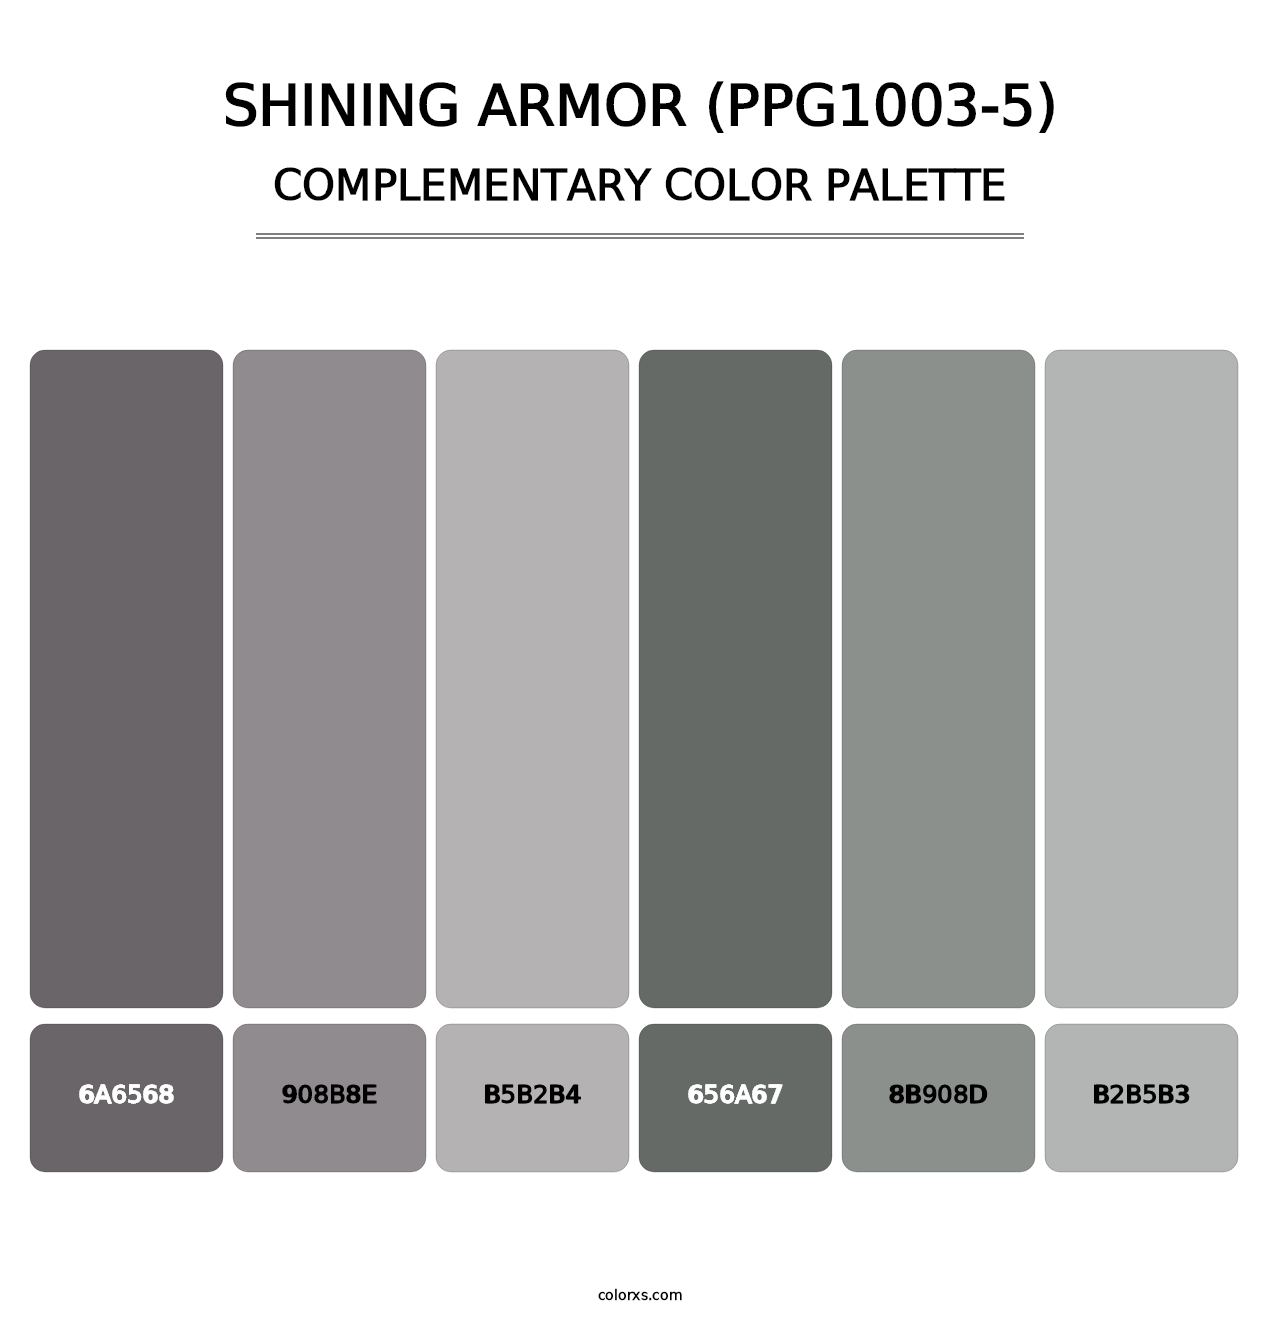 Shining Armor (PPG1003-5) - Complementary Color Palette